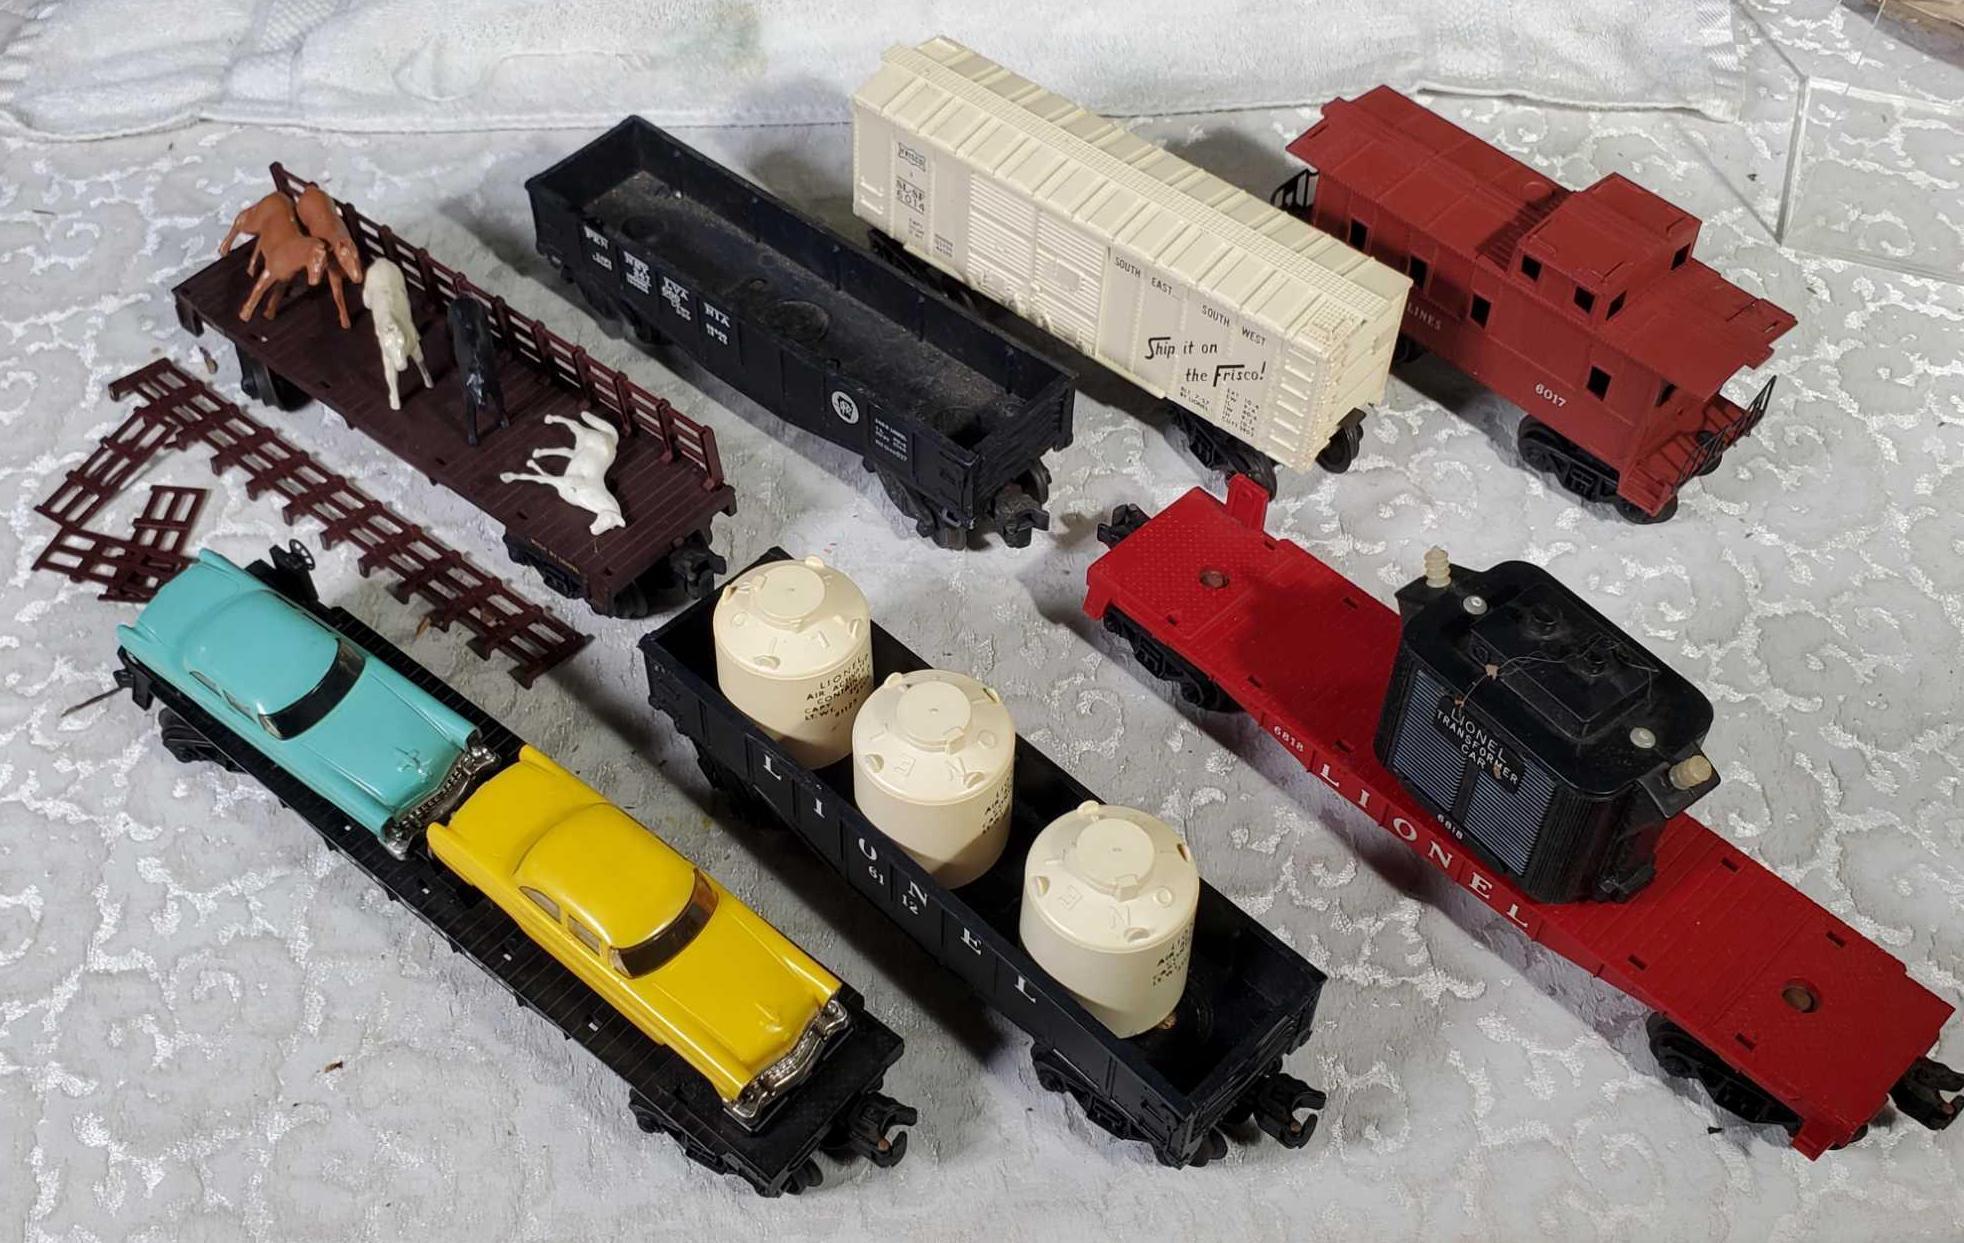 Lionel Post War Model Railroad Engines, Cars and Accessories with Some As Is Boxes